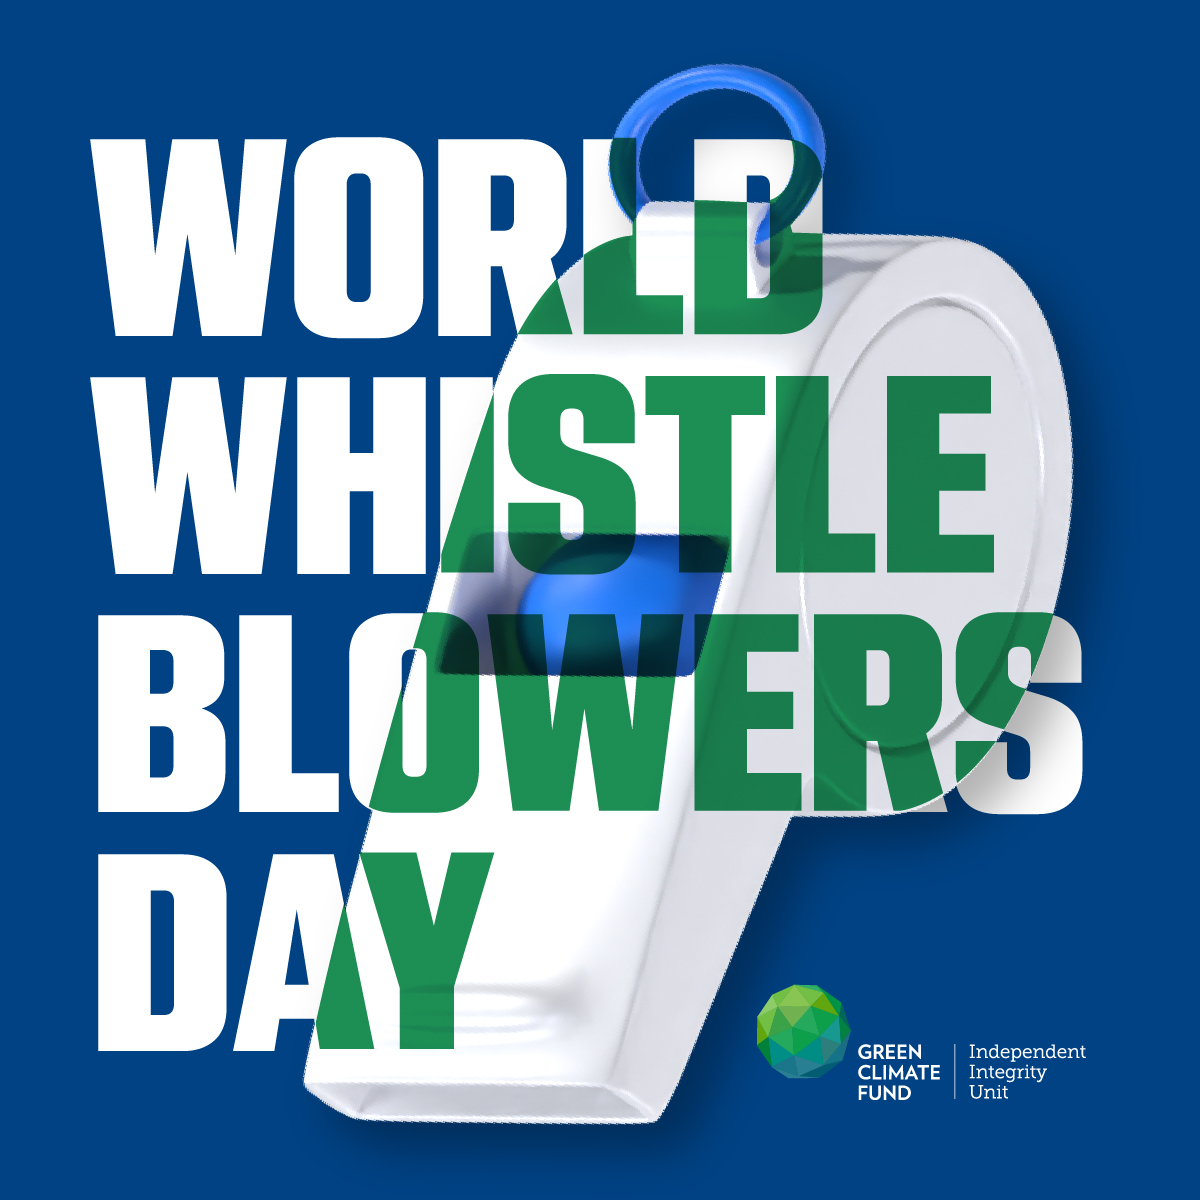 23 June is #WorldWhistleblowersDay, and IIU recognises the crucial role that whistleblowers play in reducing corruption.

Our recent Peer-to-Peer Learning Alliance brief details how to achieve whistleblower protection for integrity in #ClimateAction: iiu.greenclimate.fund/document/achie…